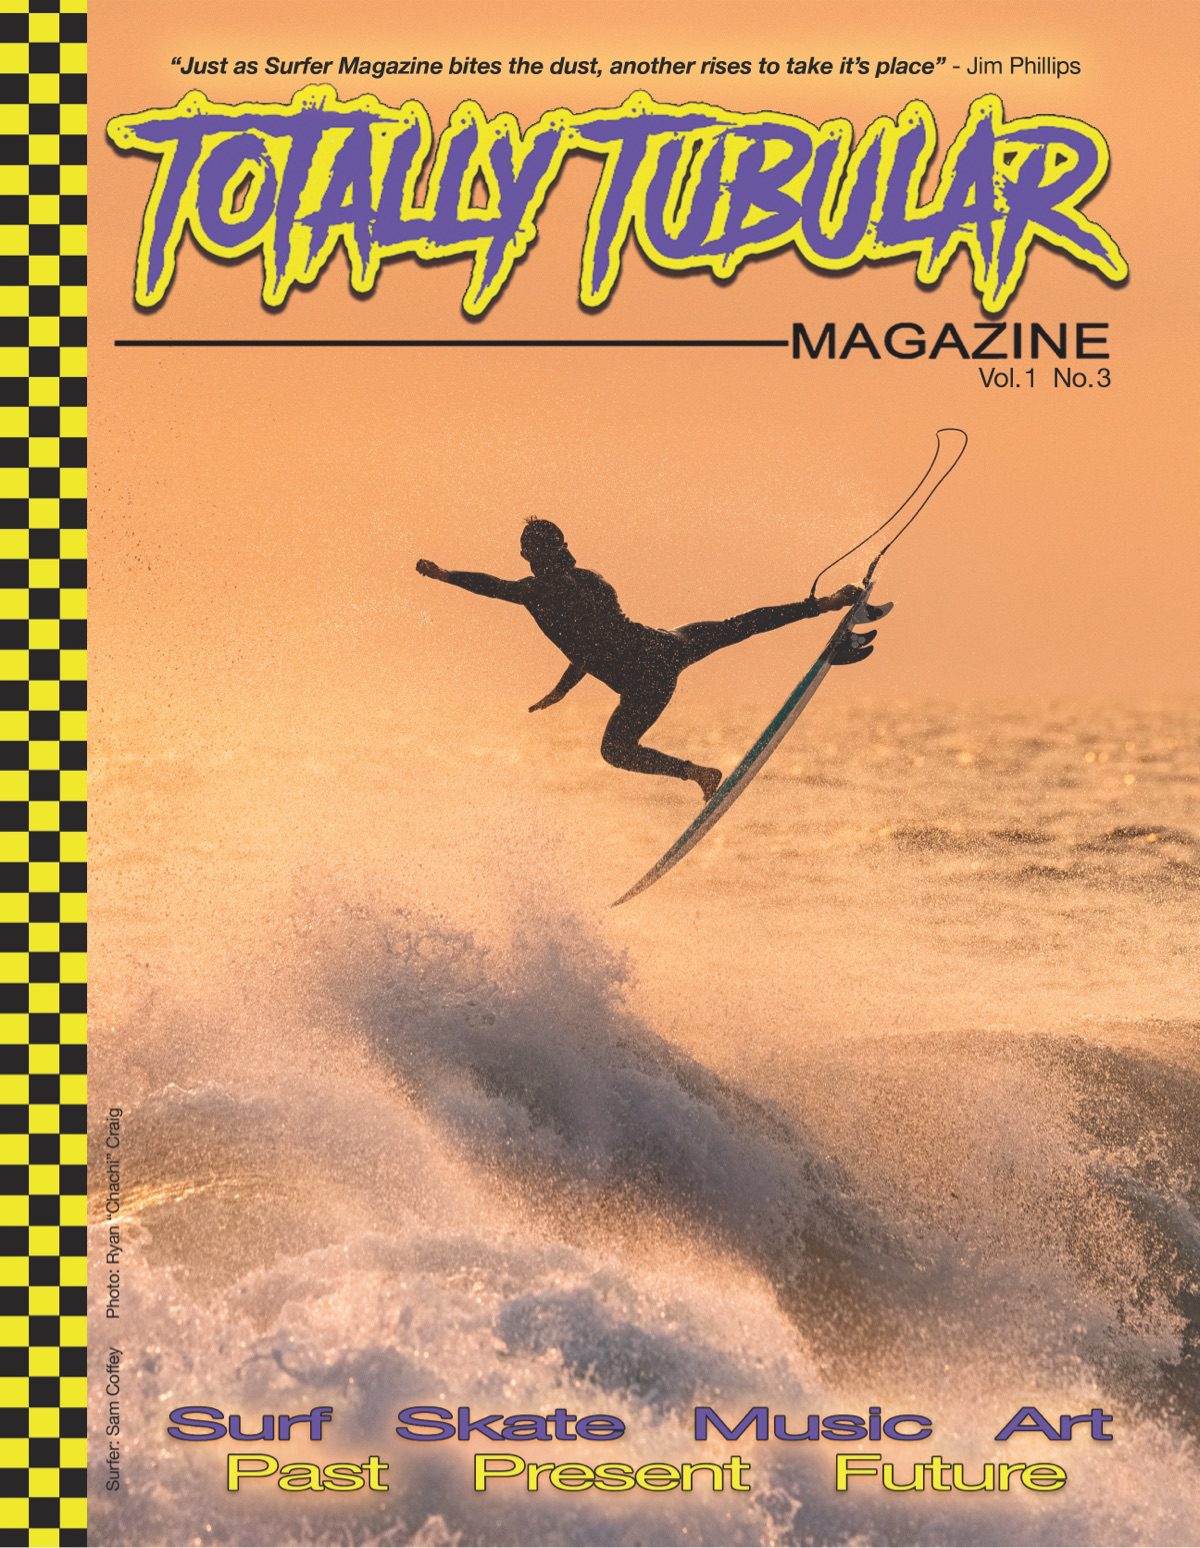 Totally Tubular Magazine Issue 3 Cover